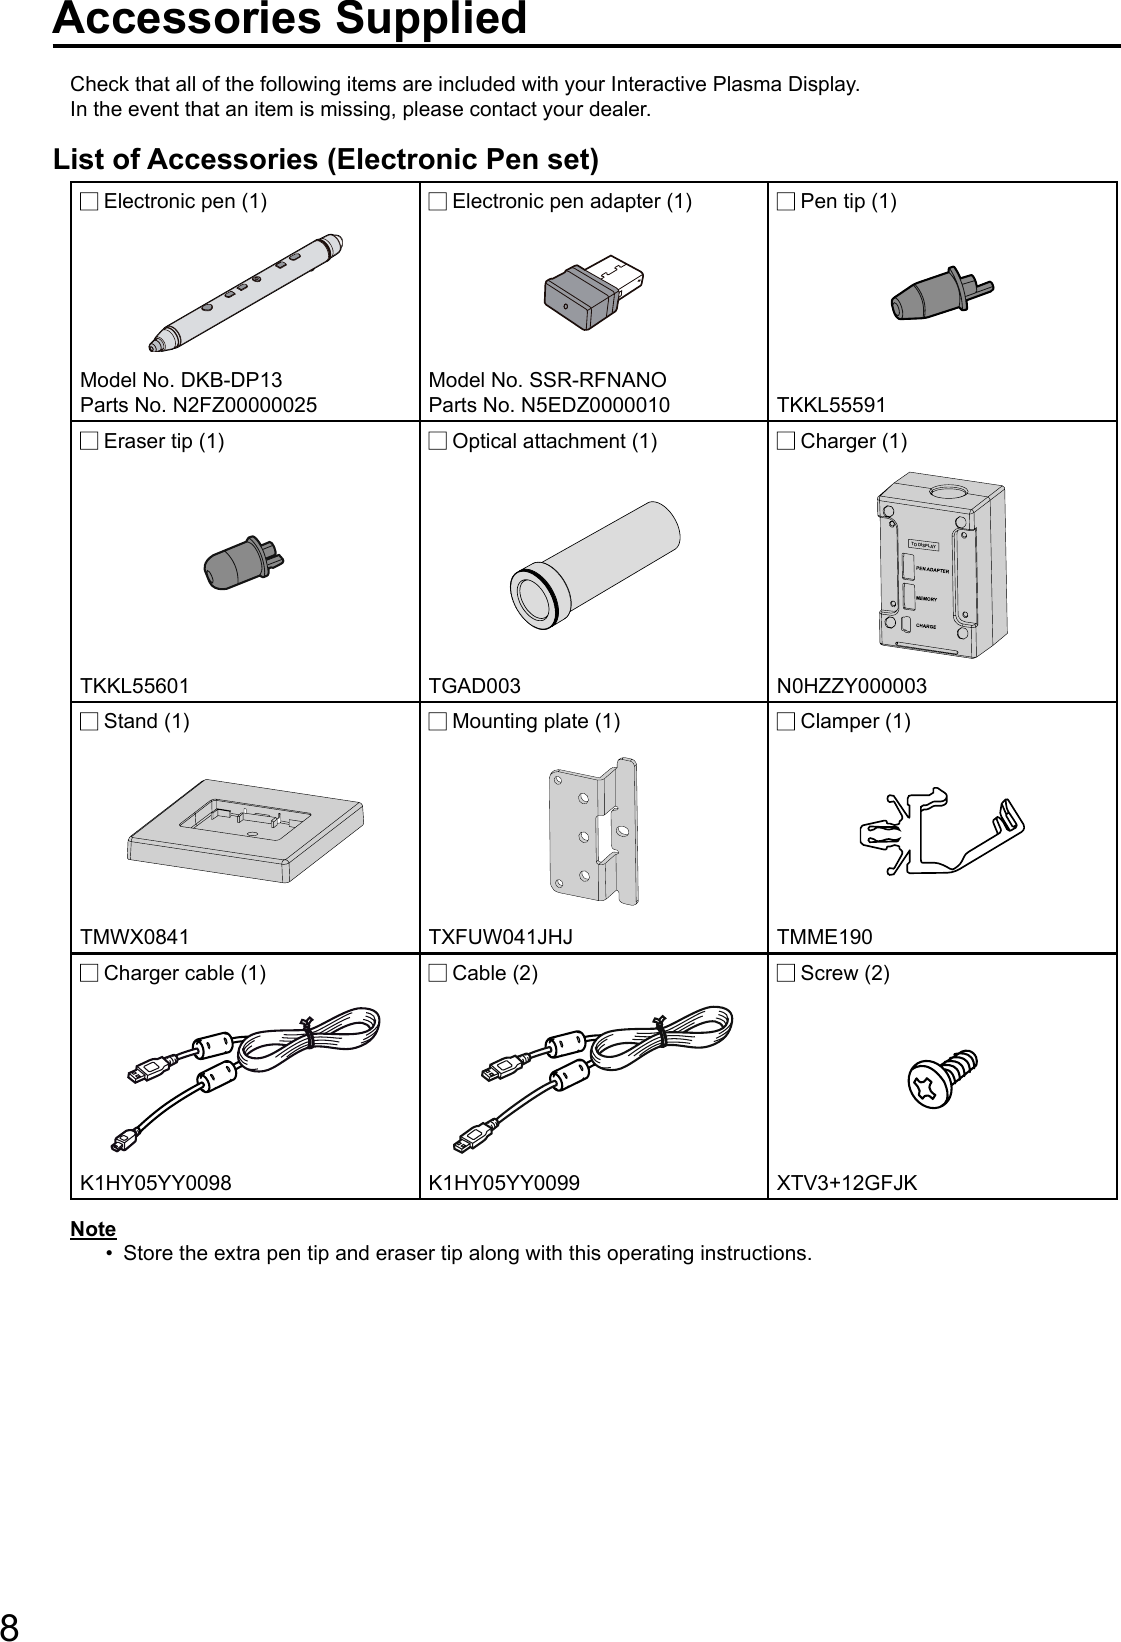 8Accessories SuppliedCheck that all of the following items are included with your Interactive Plasma Display.In the event that an item is missing, please contact your dealer.List of Accessories (Electronic Pen set) Electronic pen (1)  Electronic pen adapter (1)  Pen tip (1)Model No. DKB-DP13Parts No. N2FZ00000025Model No. SSR-RFNANOParts No. N5EDZ0000010 TKKL55591 Eraser tip (1)  Optical attachment (1)  Charger (1)TO DISPLAYTKKL55601 TGAD003 N0HZZY000003 Stand (1)  Mounting plate (1)  Clamper (1)TMWX0841 TXFUW041JHJ TMME190 Charger cable (1)  Cable (2)  Screw (2)K1HY05YY0098 K1HY05YY0099 XTV3+12GFJKNoteStore the extra pen tip and eraser tip along with this operating instructions.• 